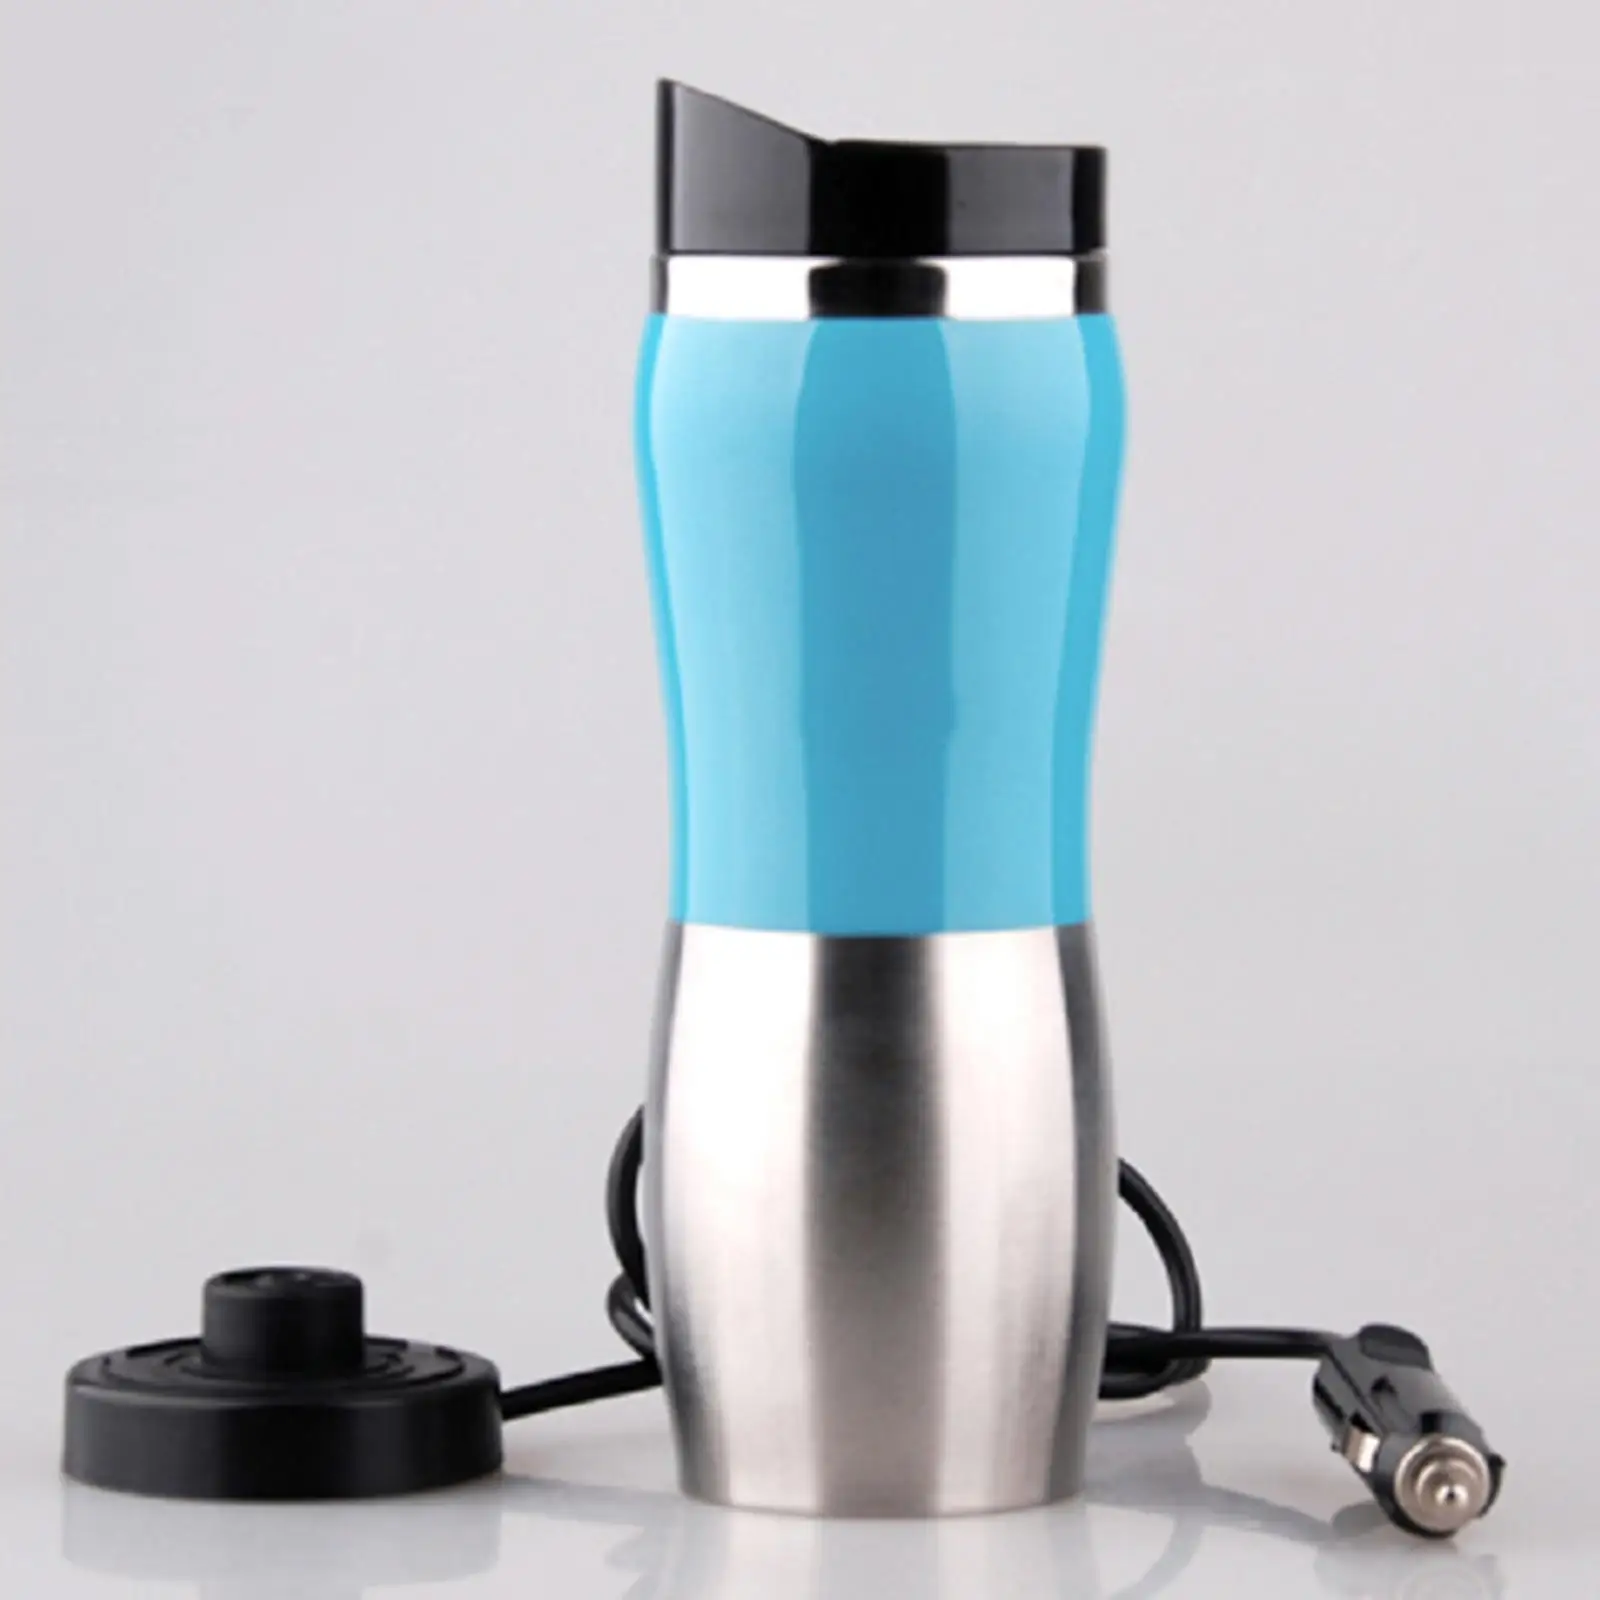  Kettle 24V 400ml Portable Electric Stainless Steel Car Water Heater Mug Fit for Tea Milk Hot Water Camping Boat Coffee Making